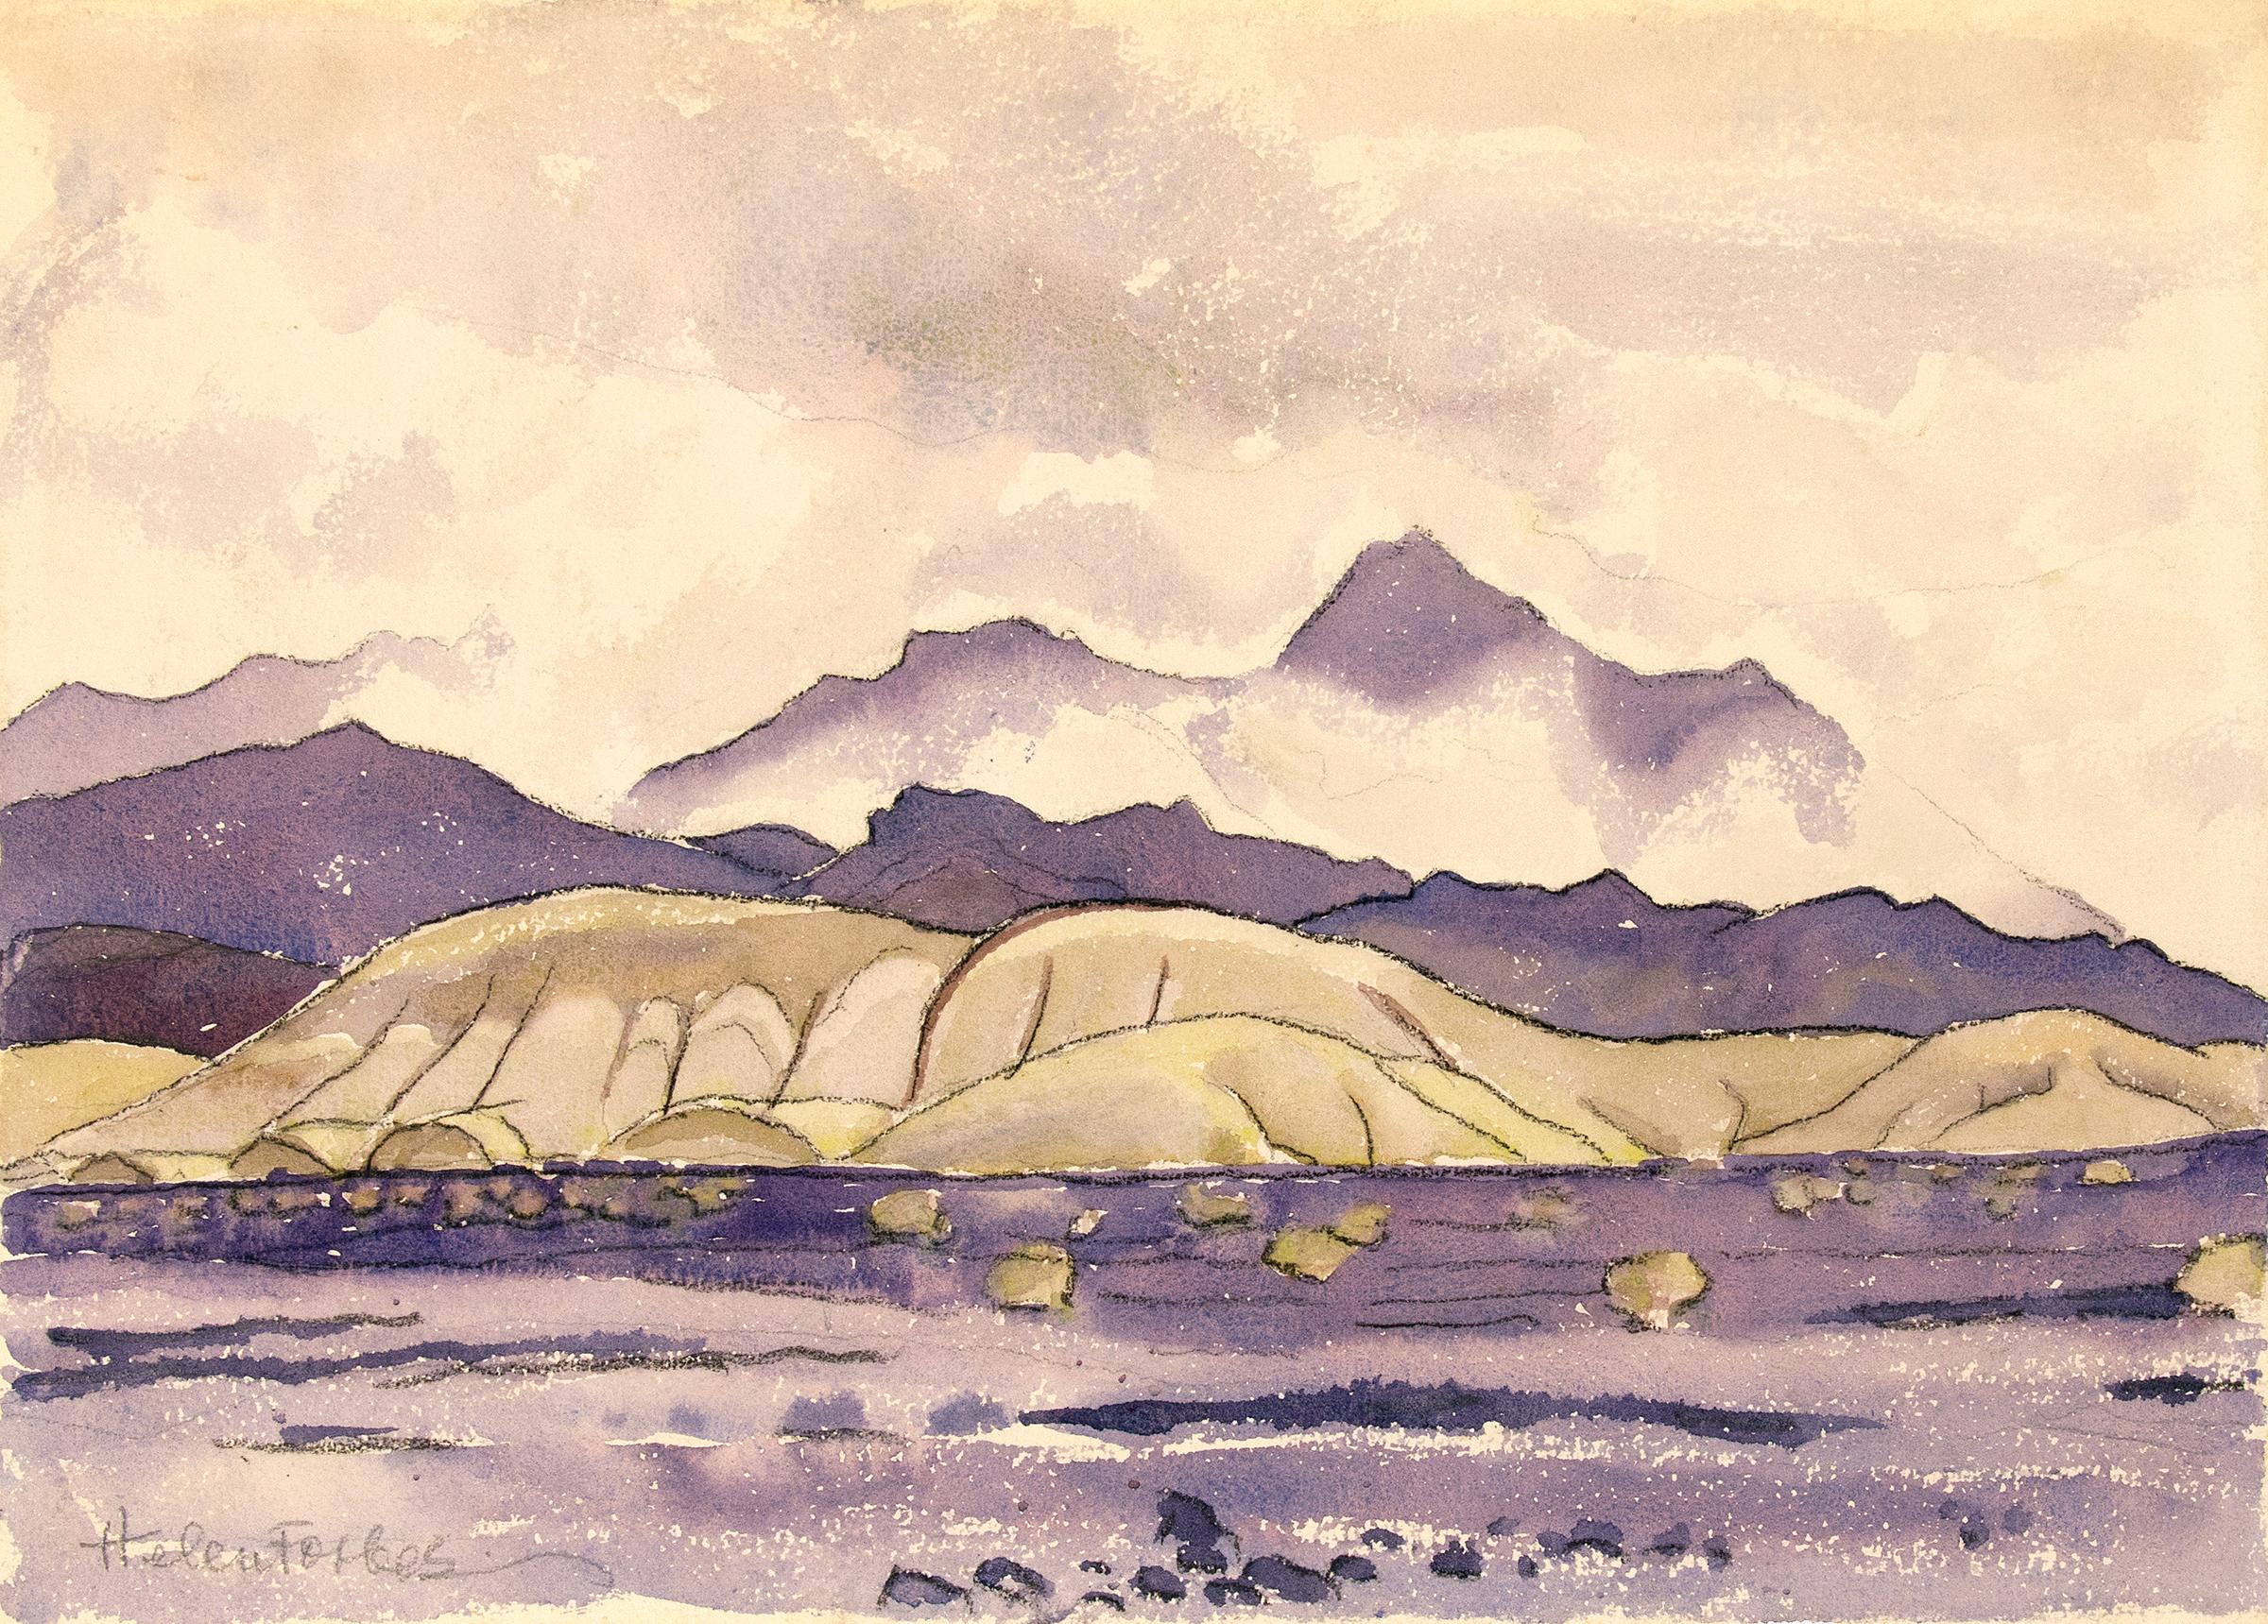 Clouds in the Desert, California Vintage Mountain Landscape Painting, 1930s - Art by Helen Forbes